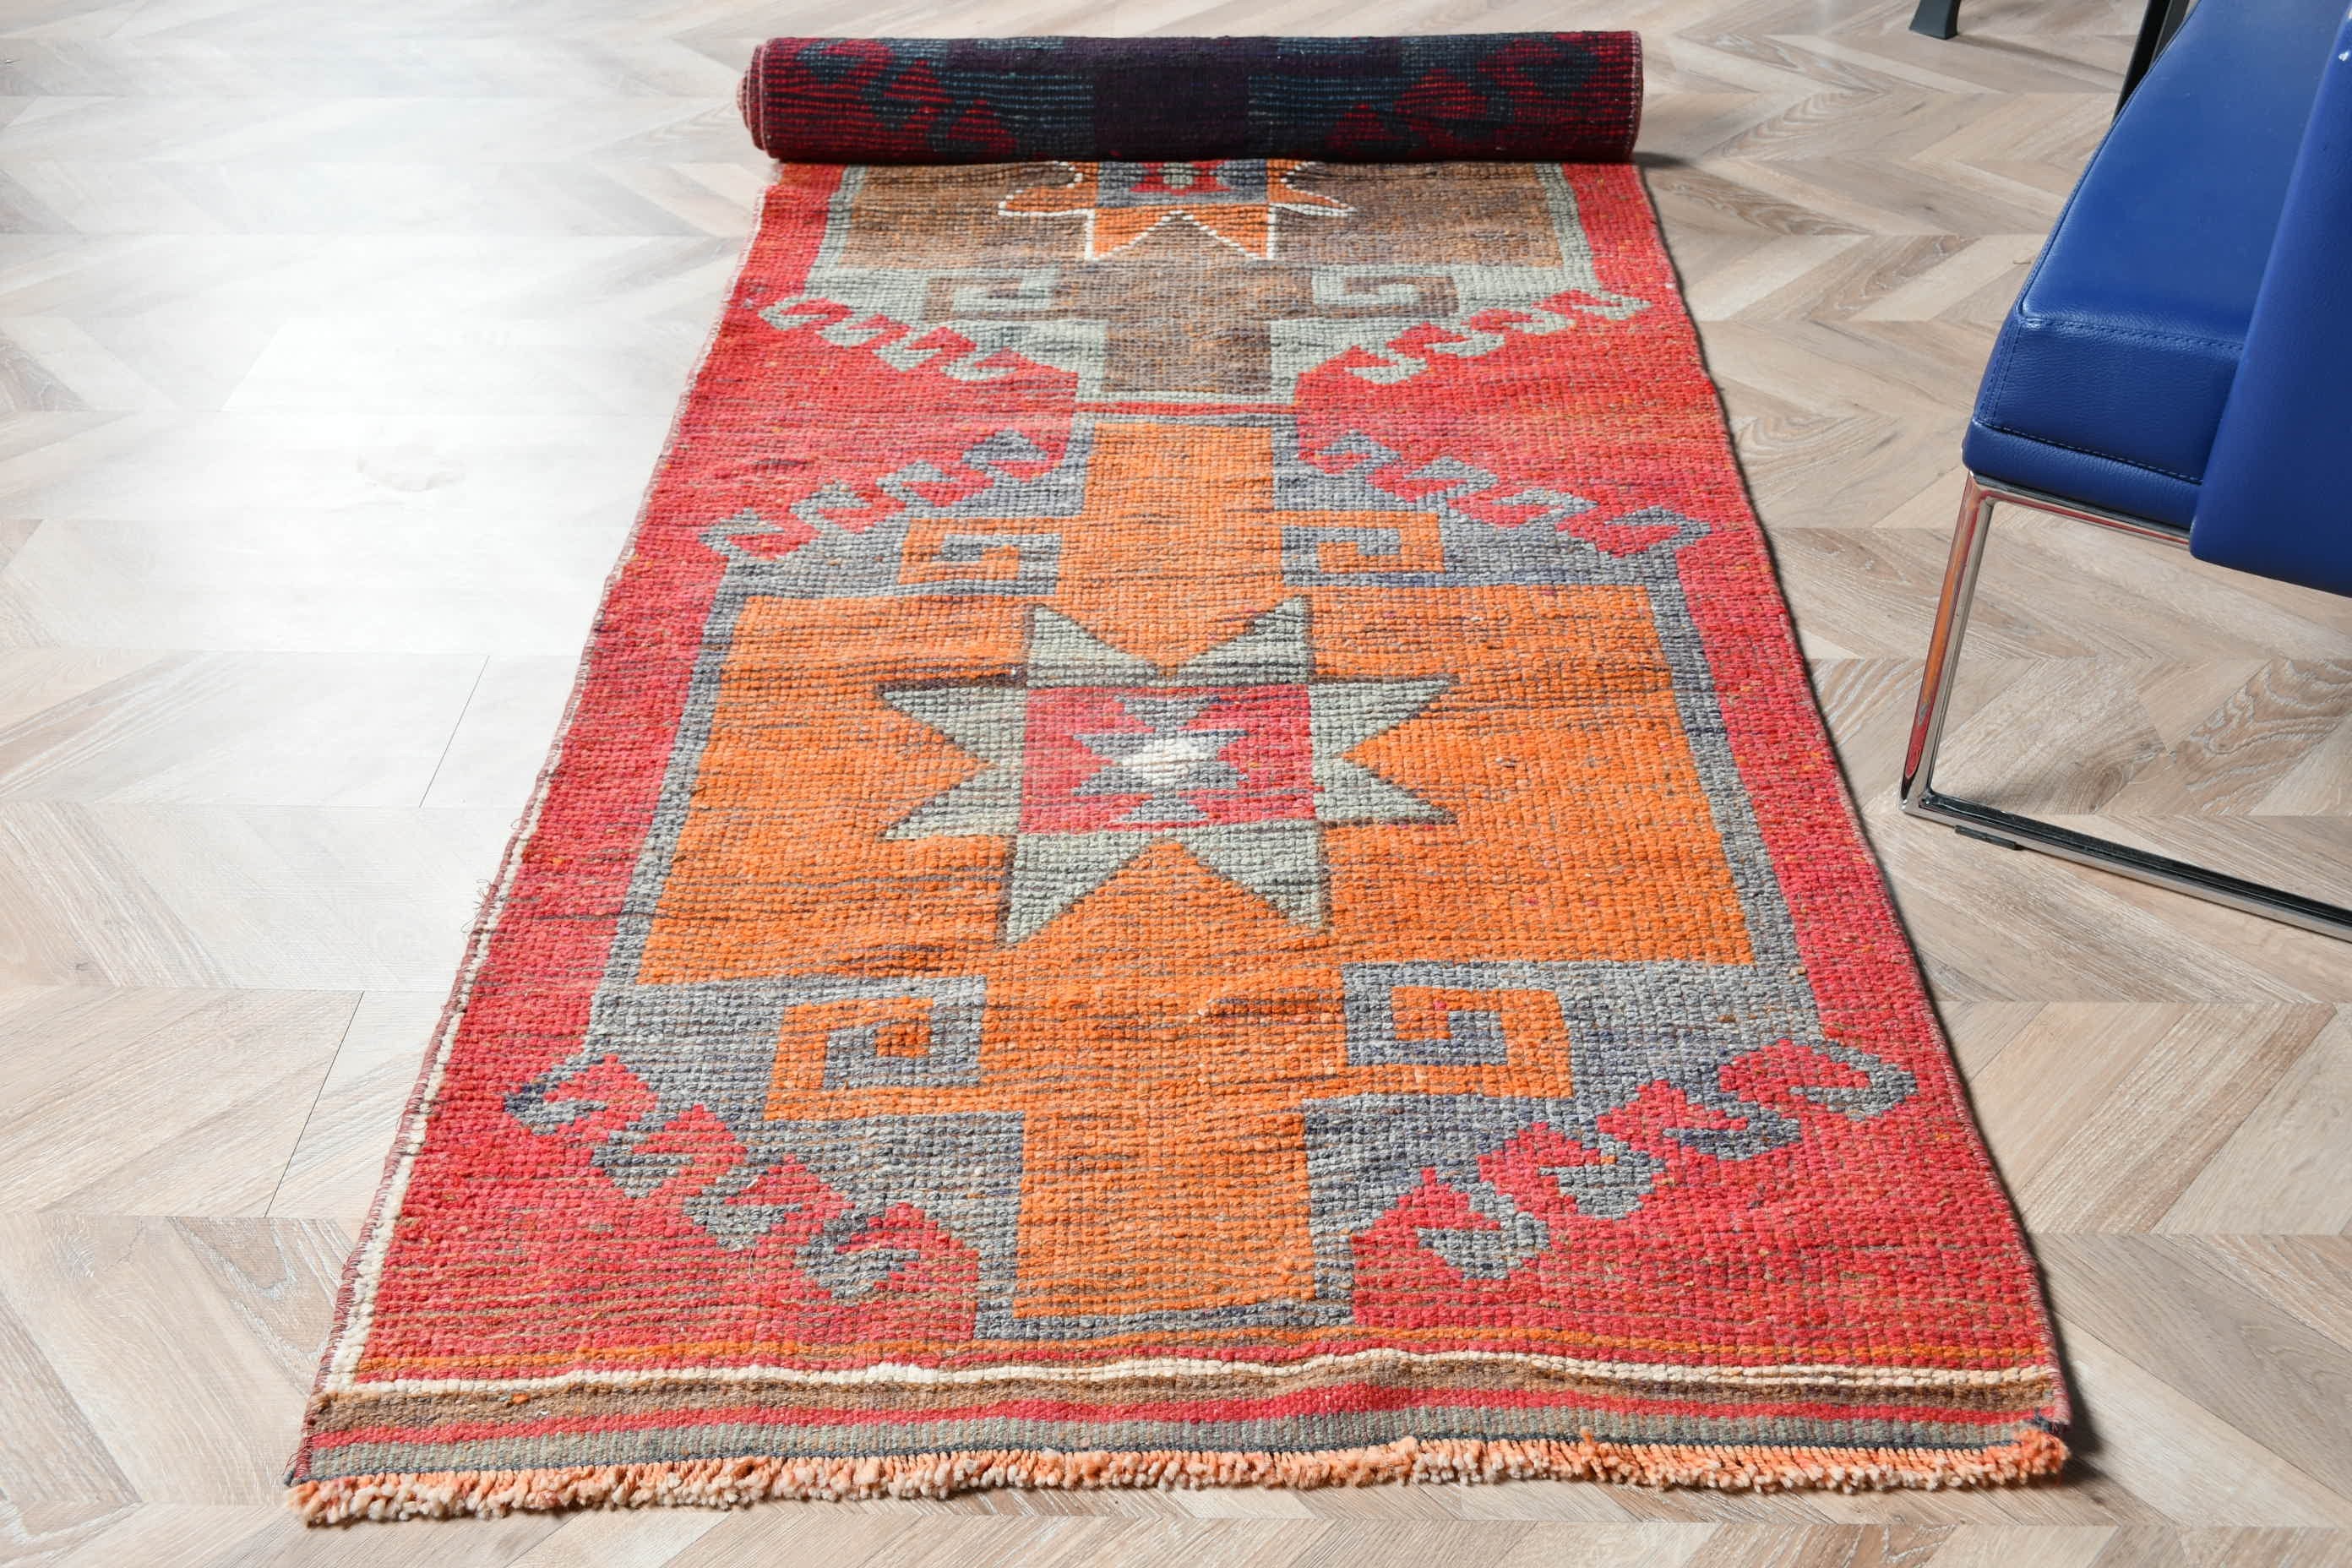 Turkish Rug, 3x11.3 ft Runner Rug, Corridor Rug, Bright Rugs, Rugs for Kitchen, Anatolian Rugs, Red Wool Rugs, Vintage Rugs, Home Decor Rug